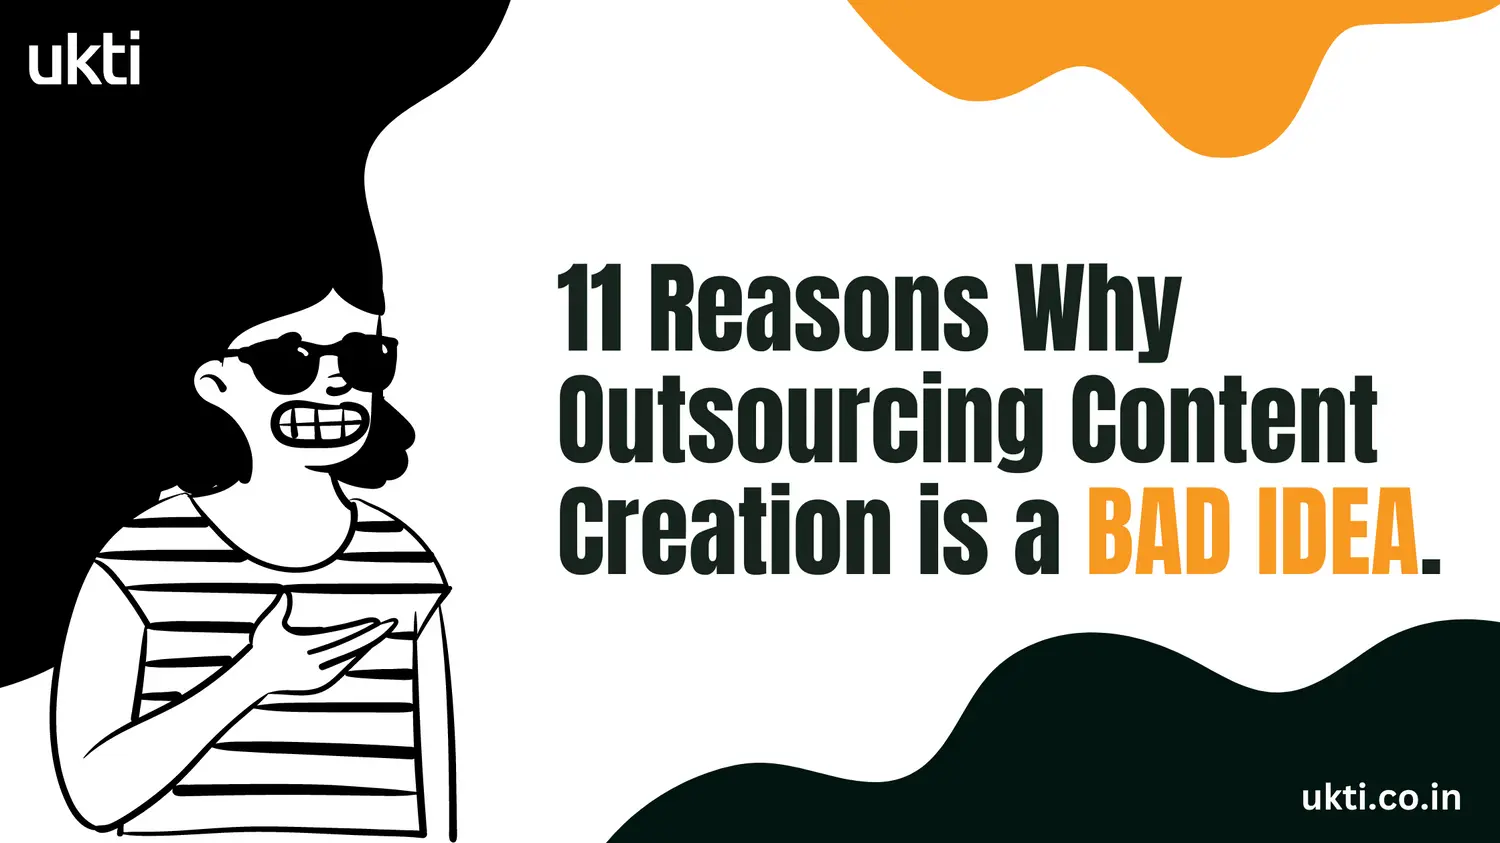 11 reasons why content outsourcing is a bad idea